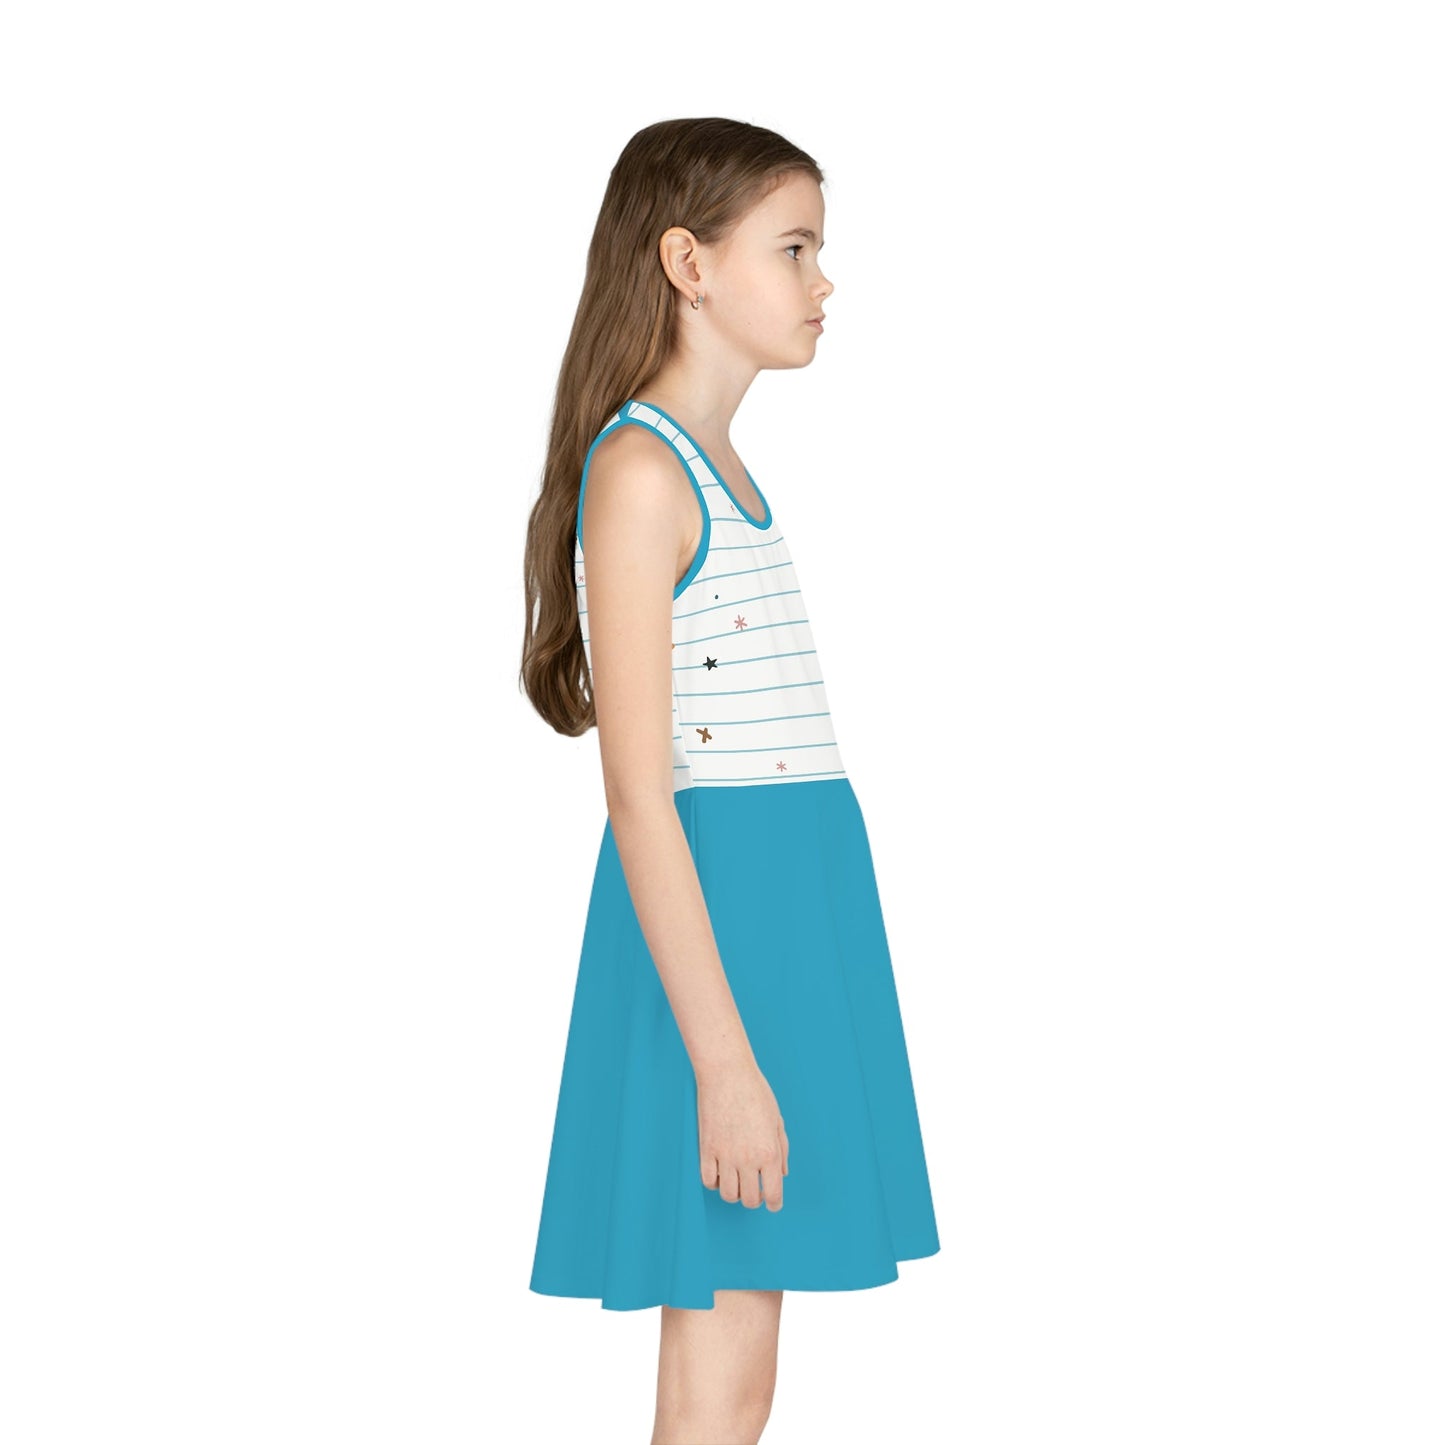 Back to School Girls' Sleeveless Sundress All Over PrintAOPAOP Clothing#tag4##tag5##tag6#